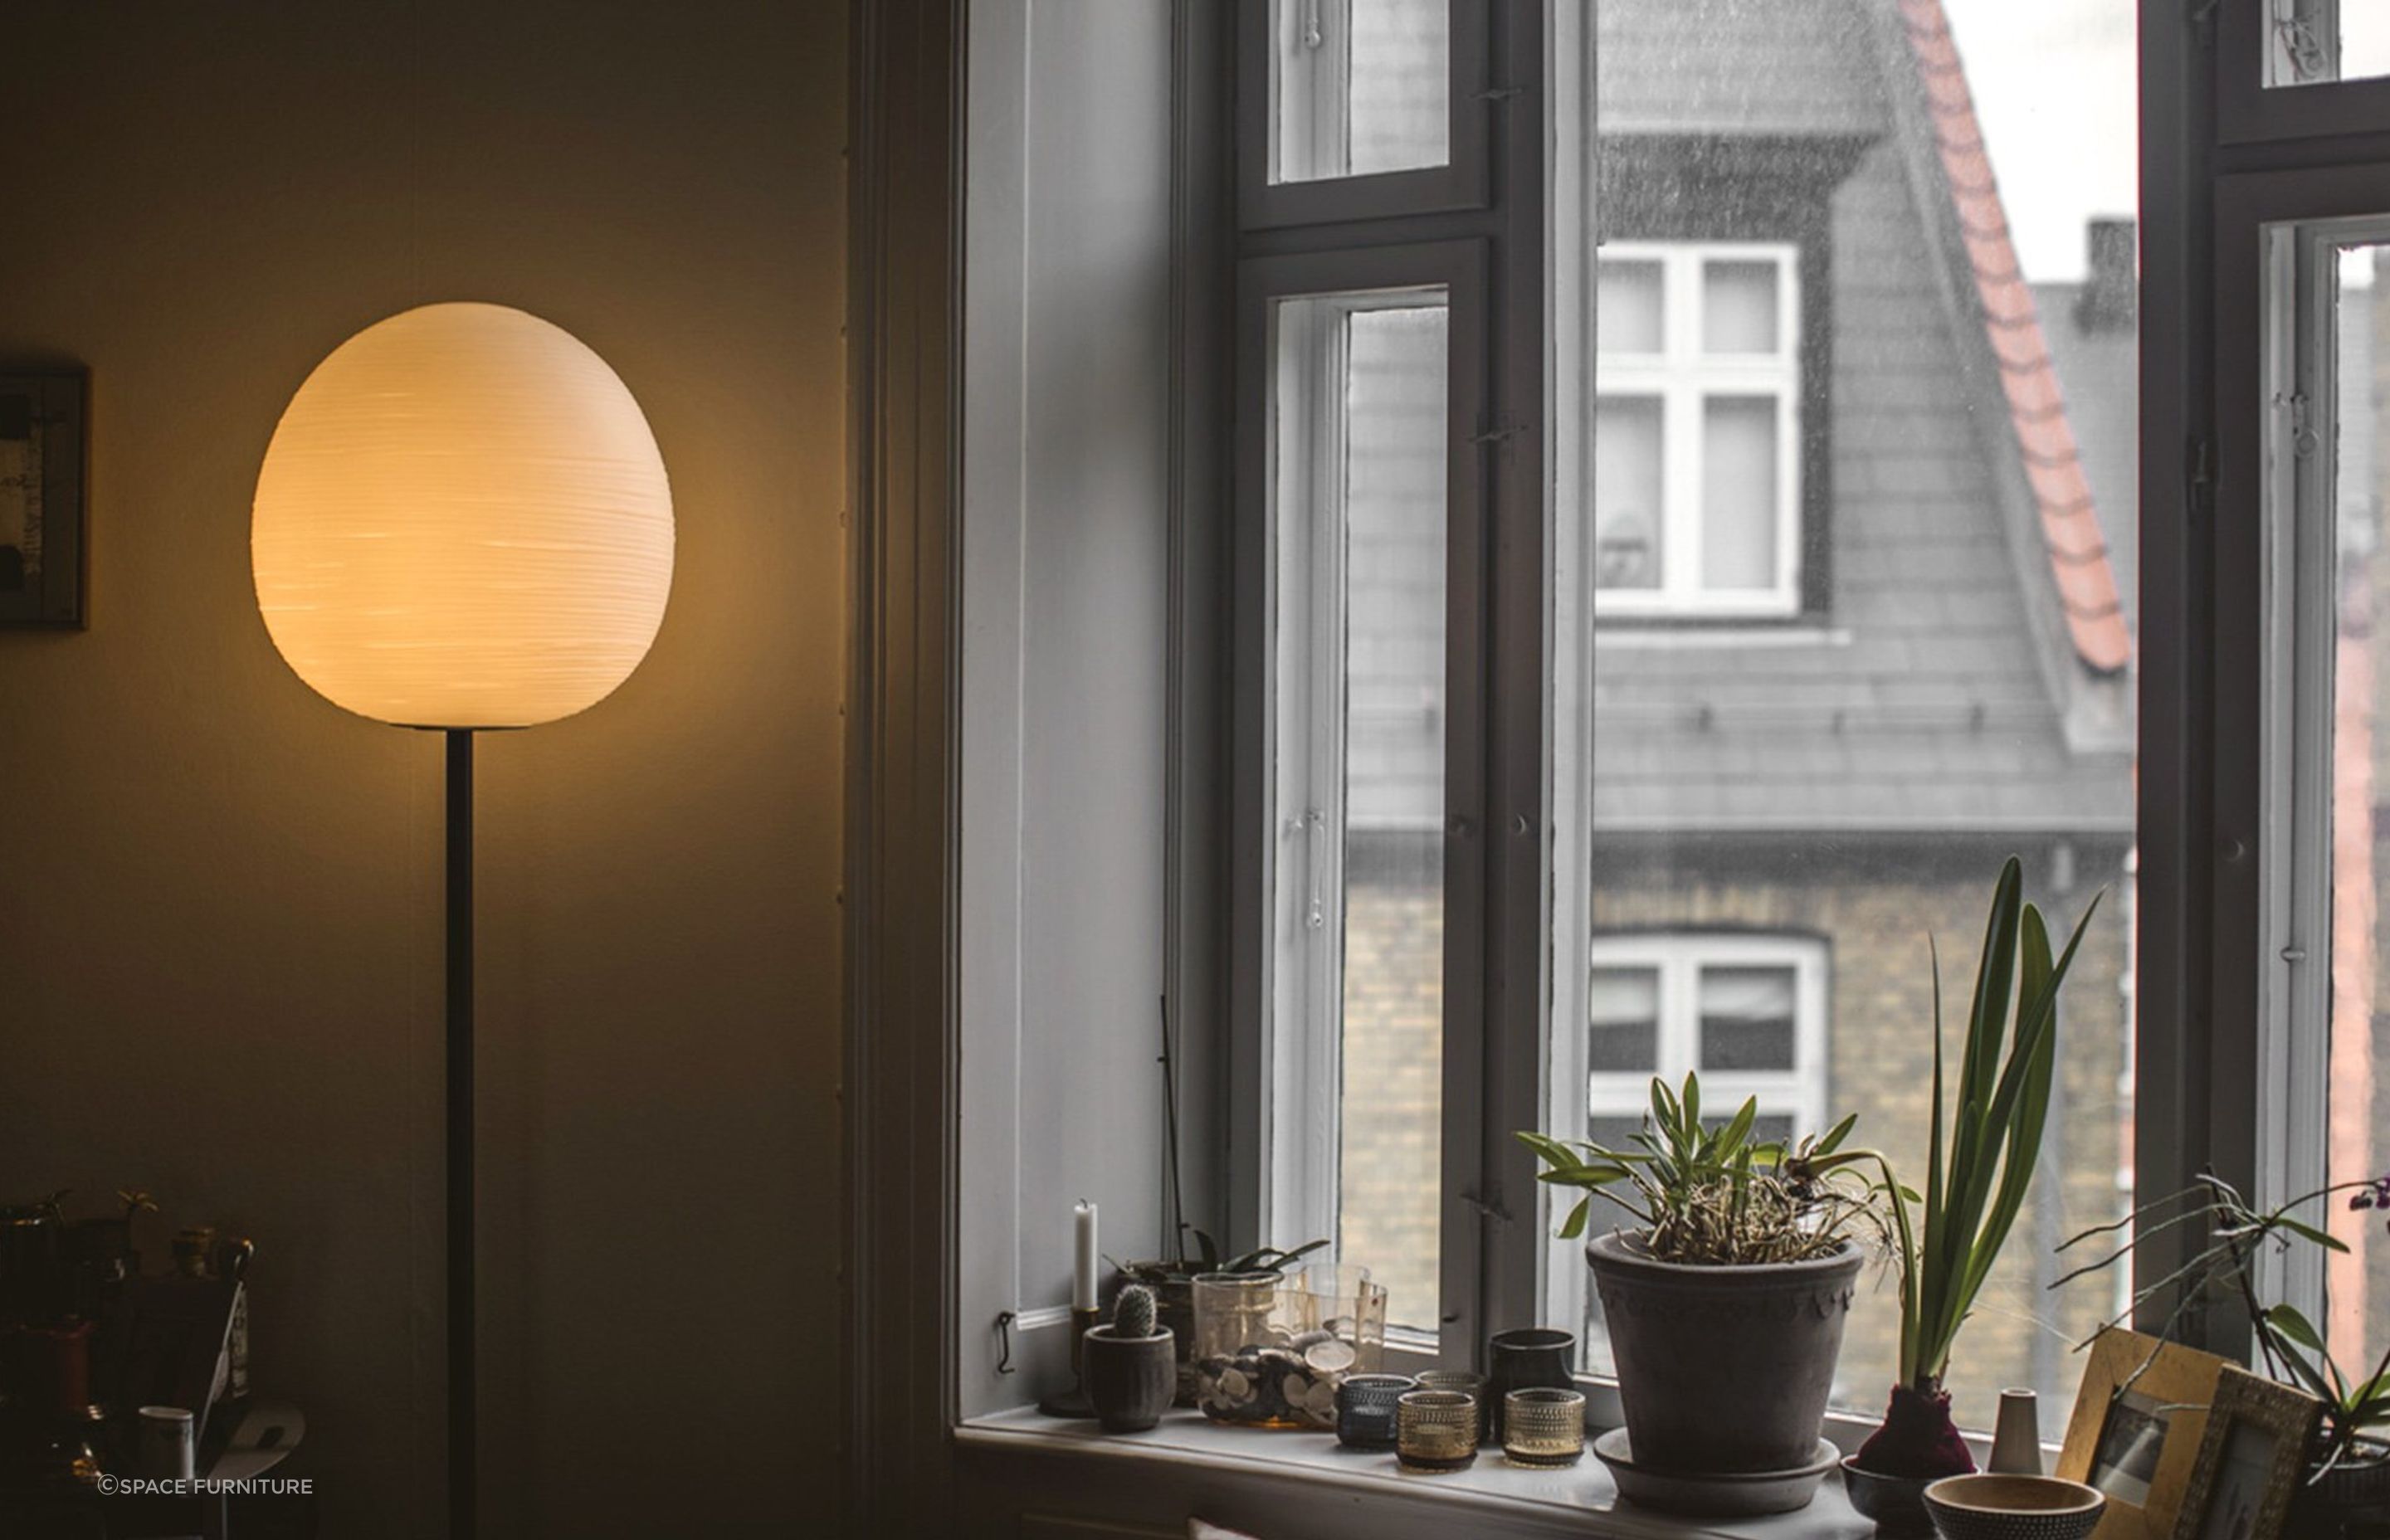 The Rituals XL Lamp can provide ambient lighting in the evening, making it the ideal floor lamp for those cosy winter rainy days.